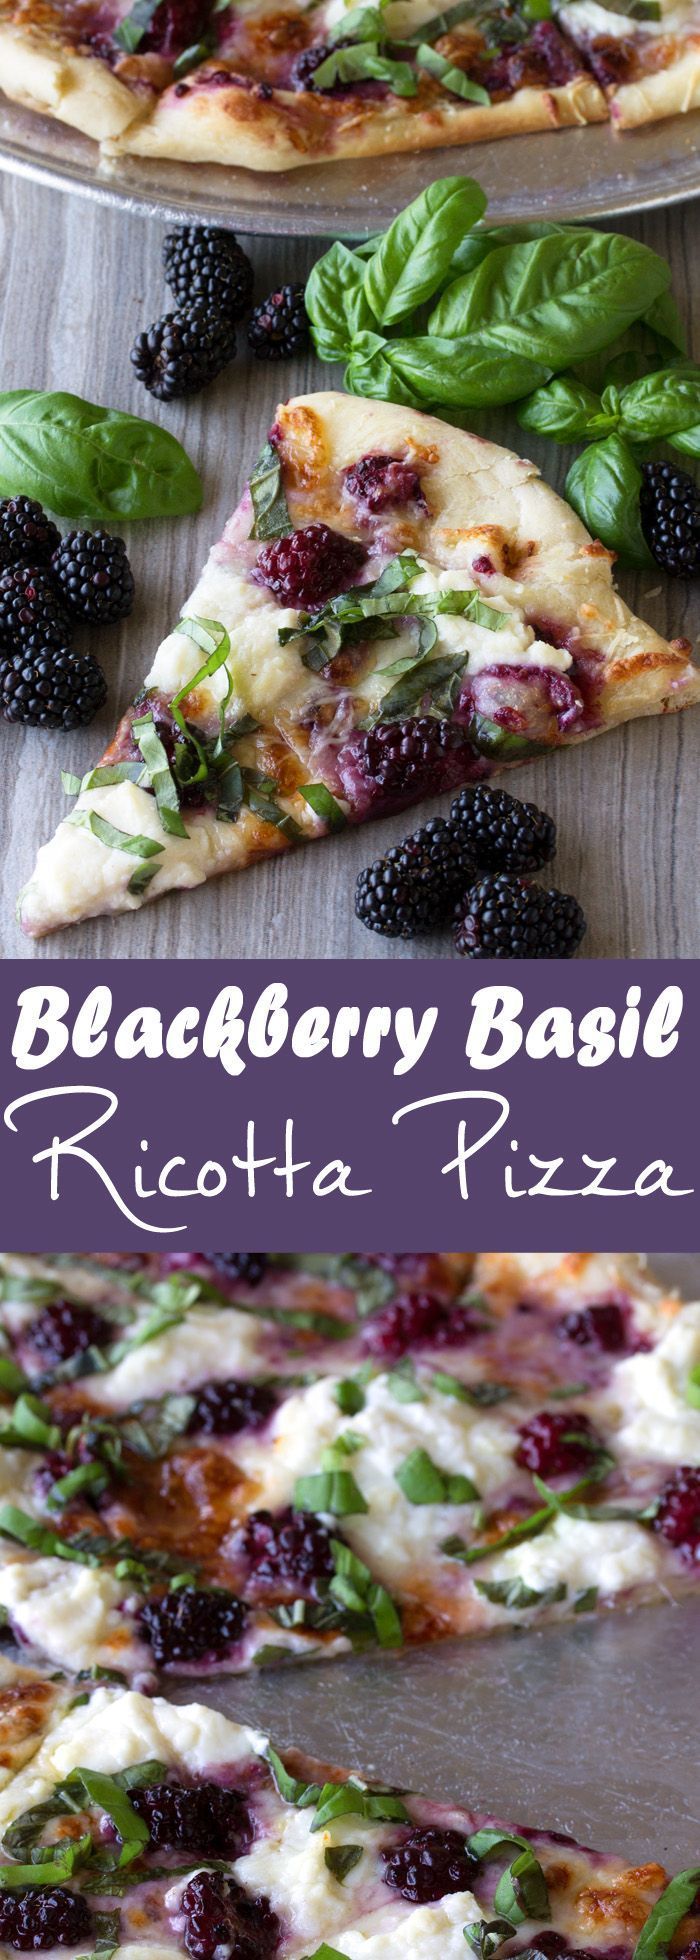 Dress up your pizza with something a little different in this Blackberry Basil Ricotta Pizza. Its elegant. Its simple. And its